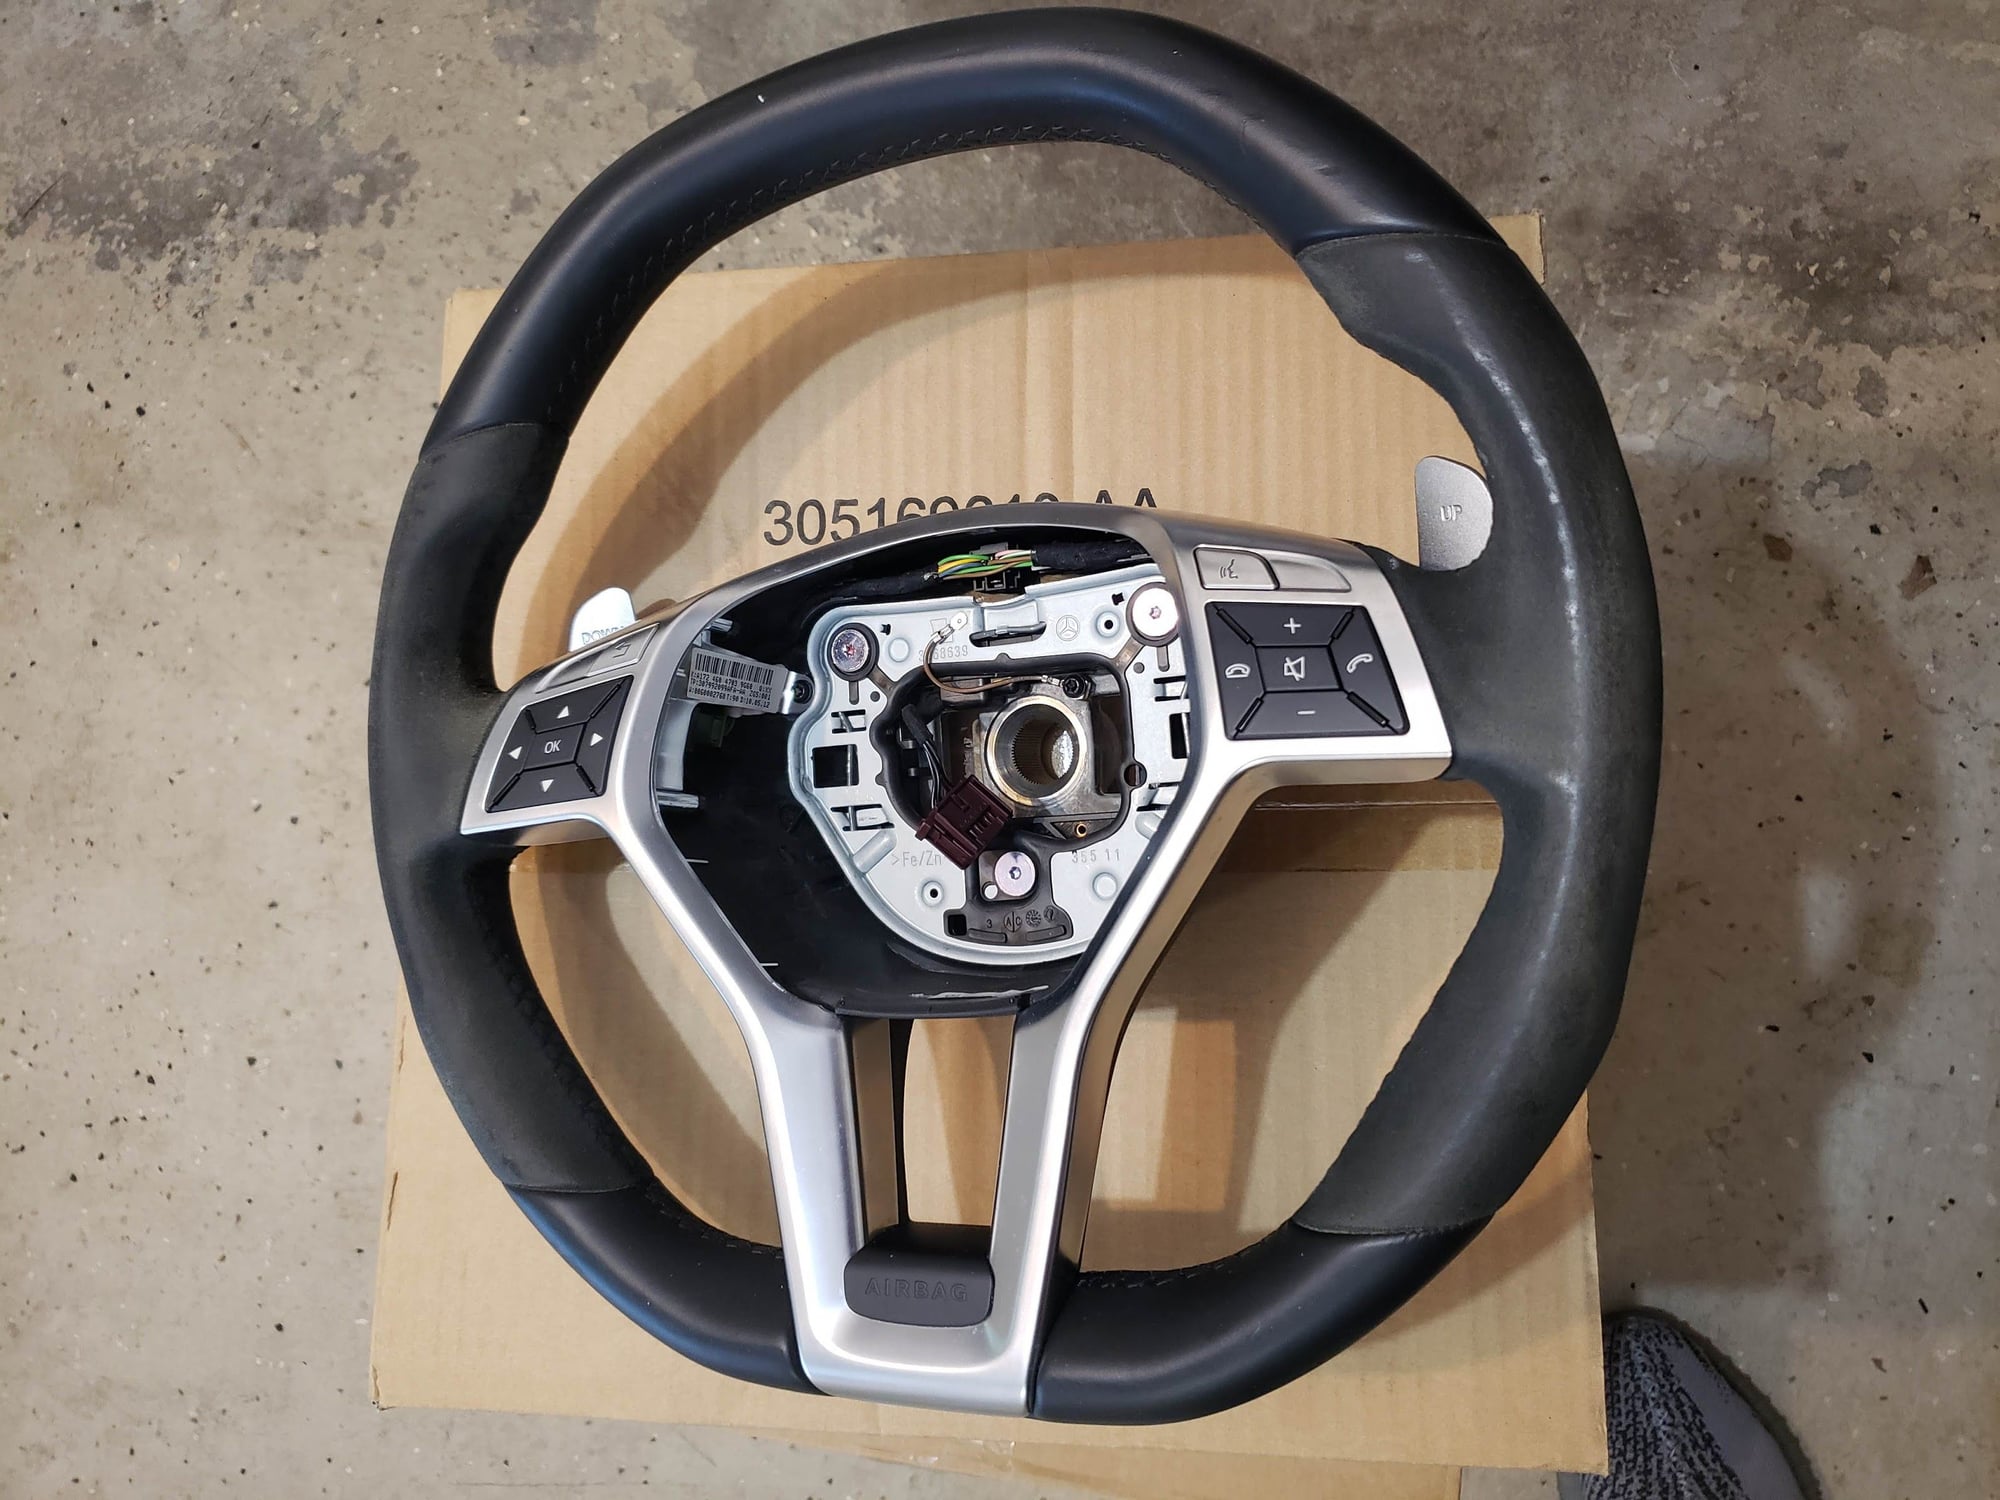 Interior/Upholstery - AMG Steering Wheel--black leather / alcantara / no airbag - Used - 2010 to 2016 Mercedes-Benz E63 AMG - 2010 to 2016 Mercedes-Benz CLS63 AMG - 2010 to 2016 Mercedes-Benz SLK55 AMG - 2010 to 2016 Mercedes-Benz C63 AMG - Flemington, NJ 08822, United States